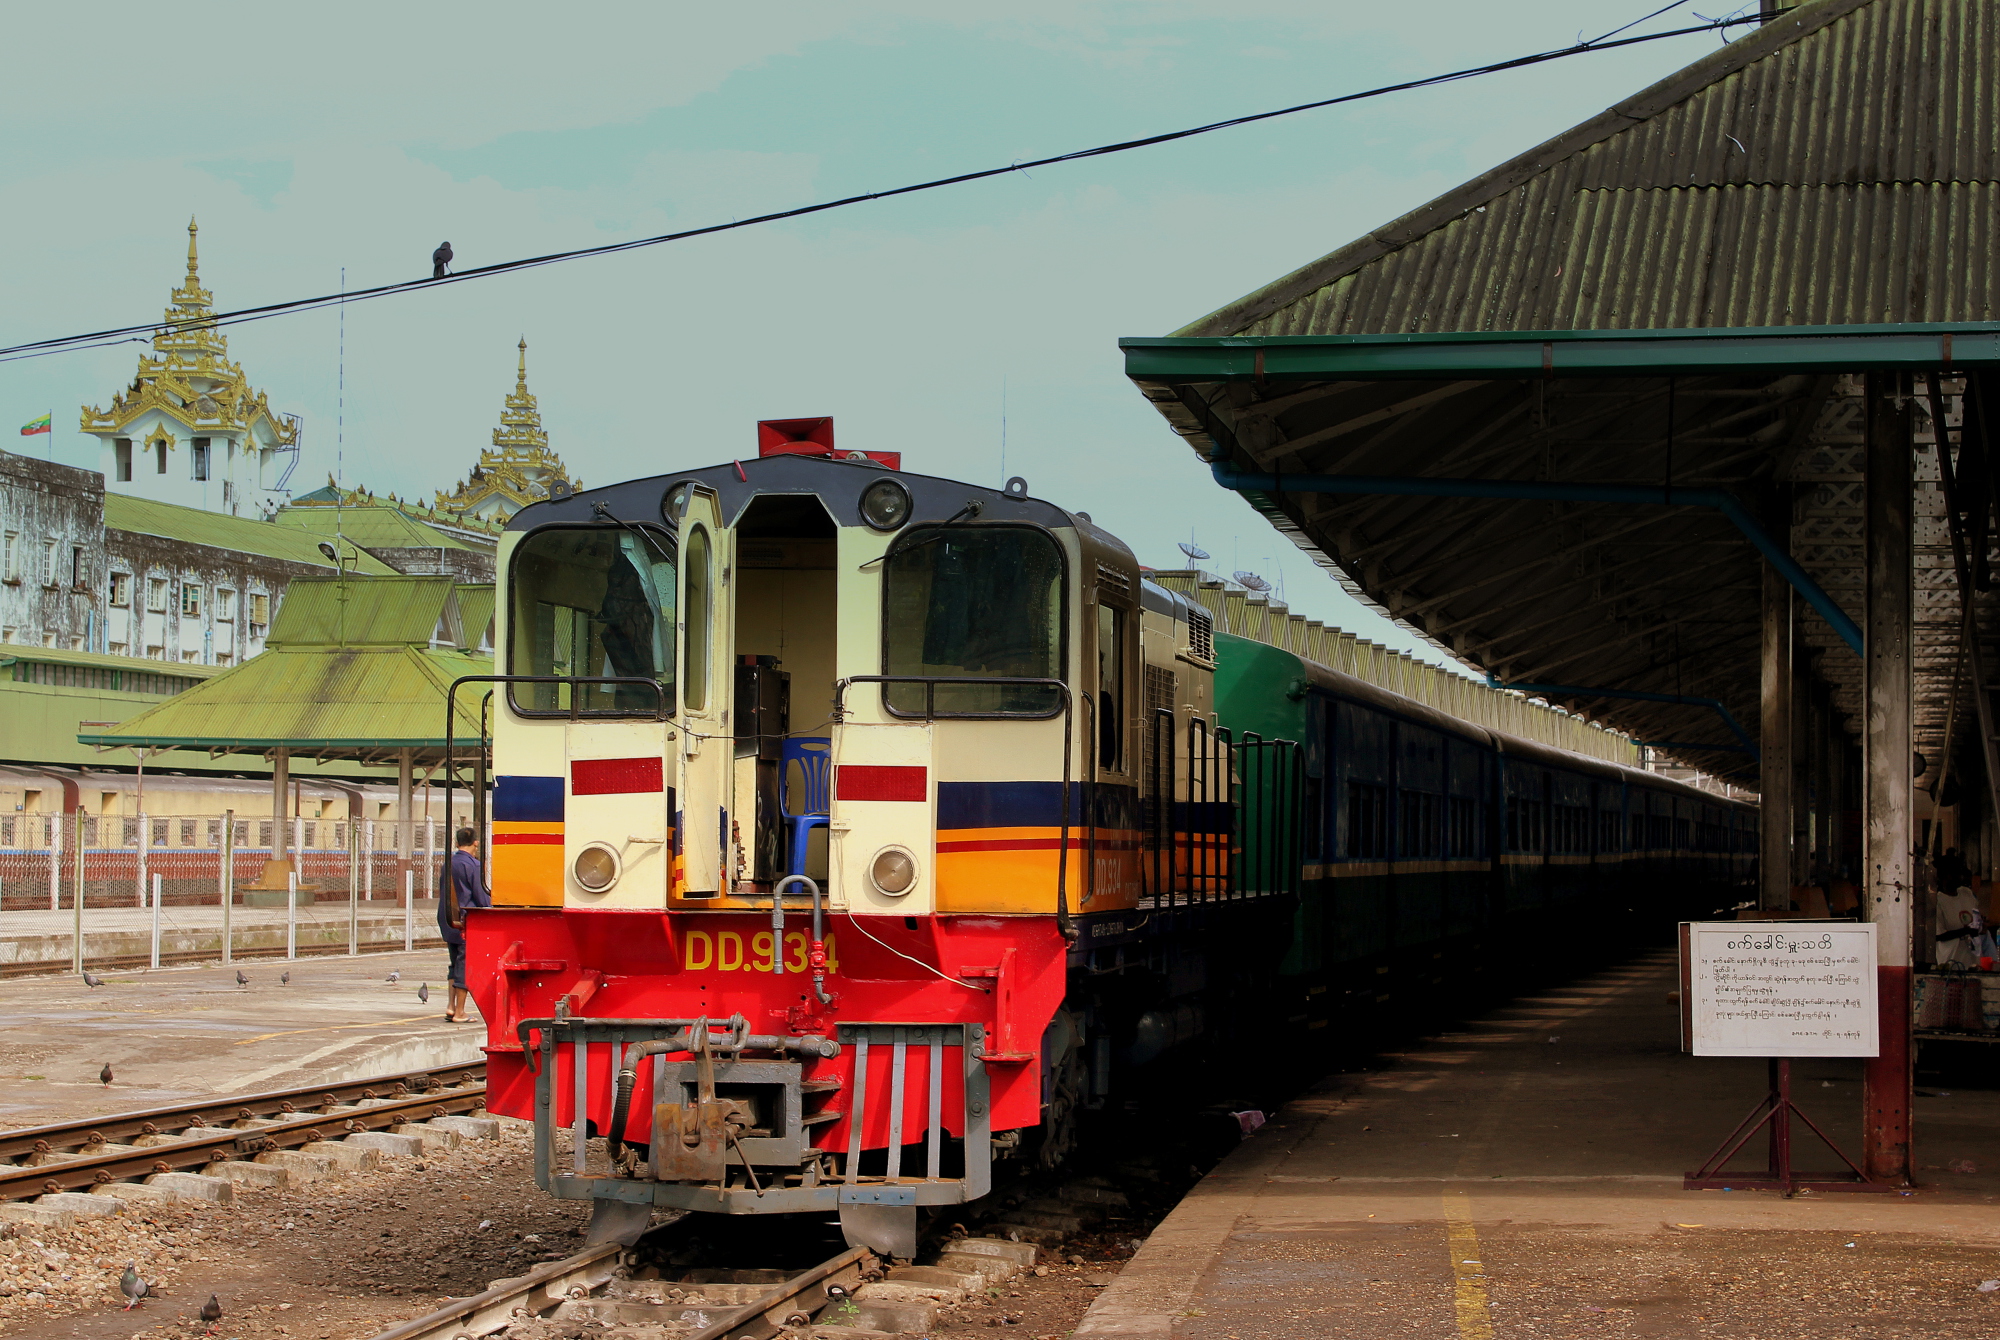 The Yangon Circular Railway currently is dilapidated and slow, but scenic. | CALFLIER001, VIA WIKIMEDIA COMMONS / CC BY-SA 2.0